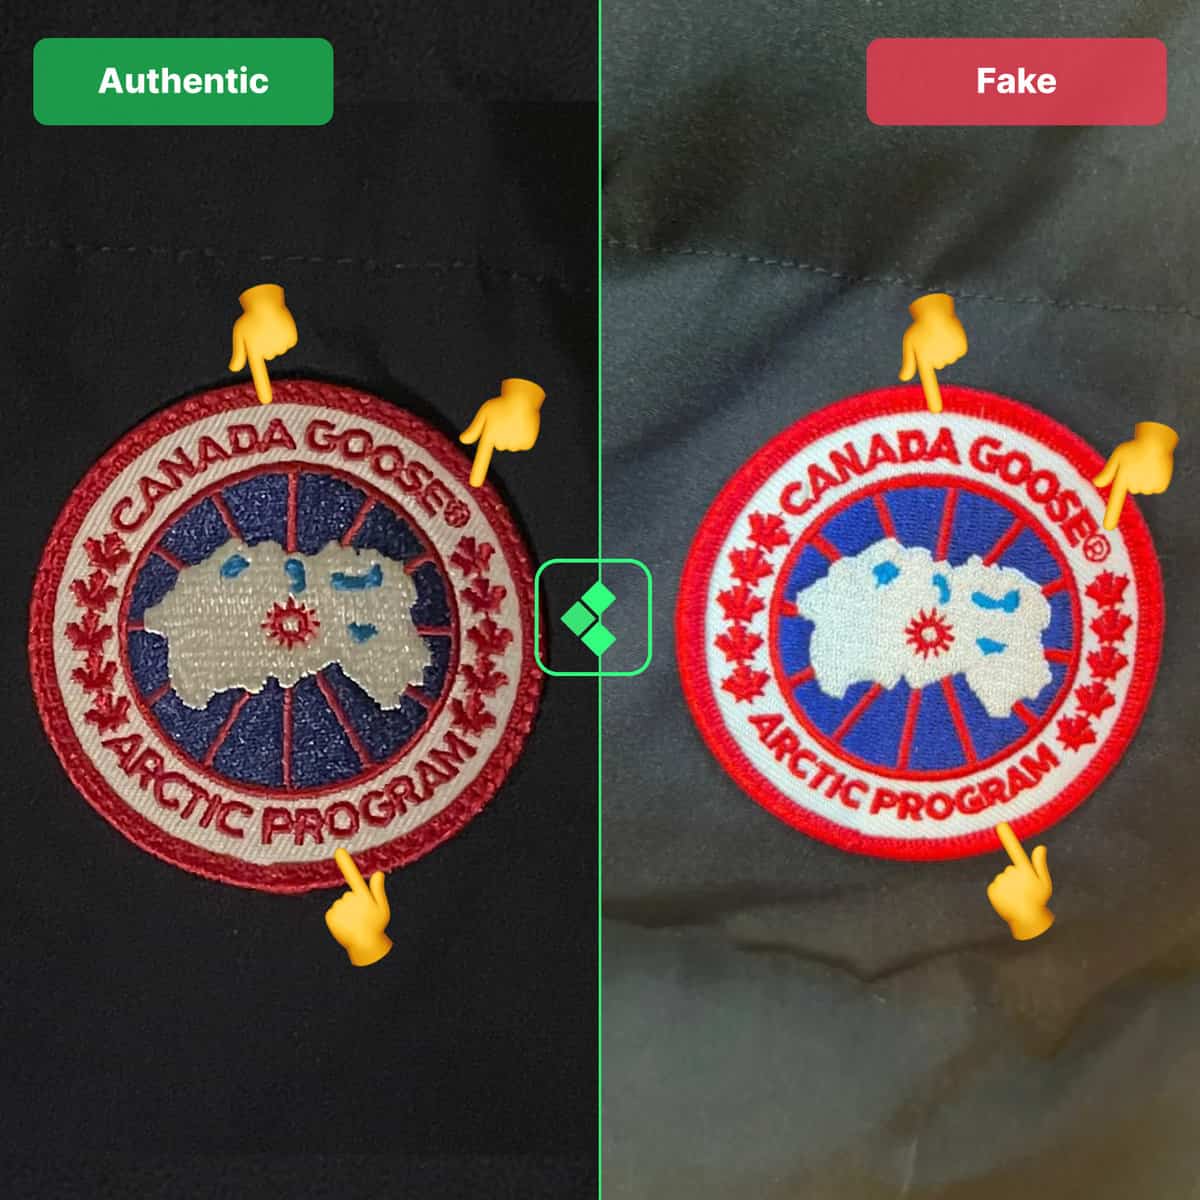 How To Spot Fake Canada Goose Clothing Legit Check By Ch | vlr.eng.br